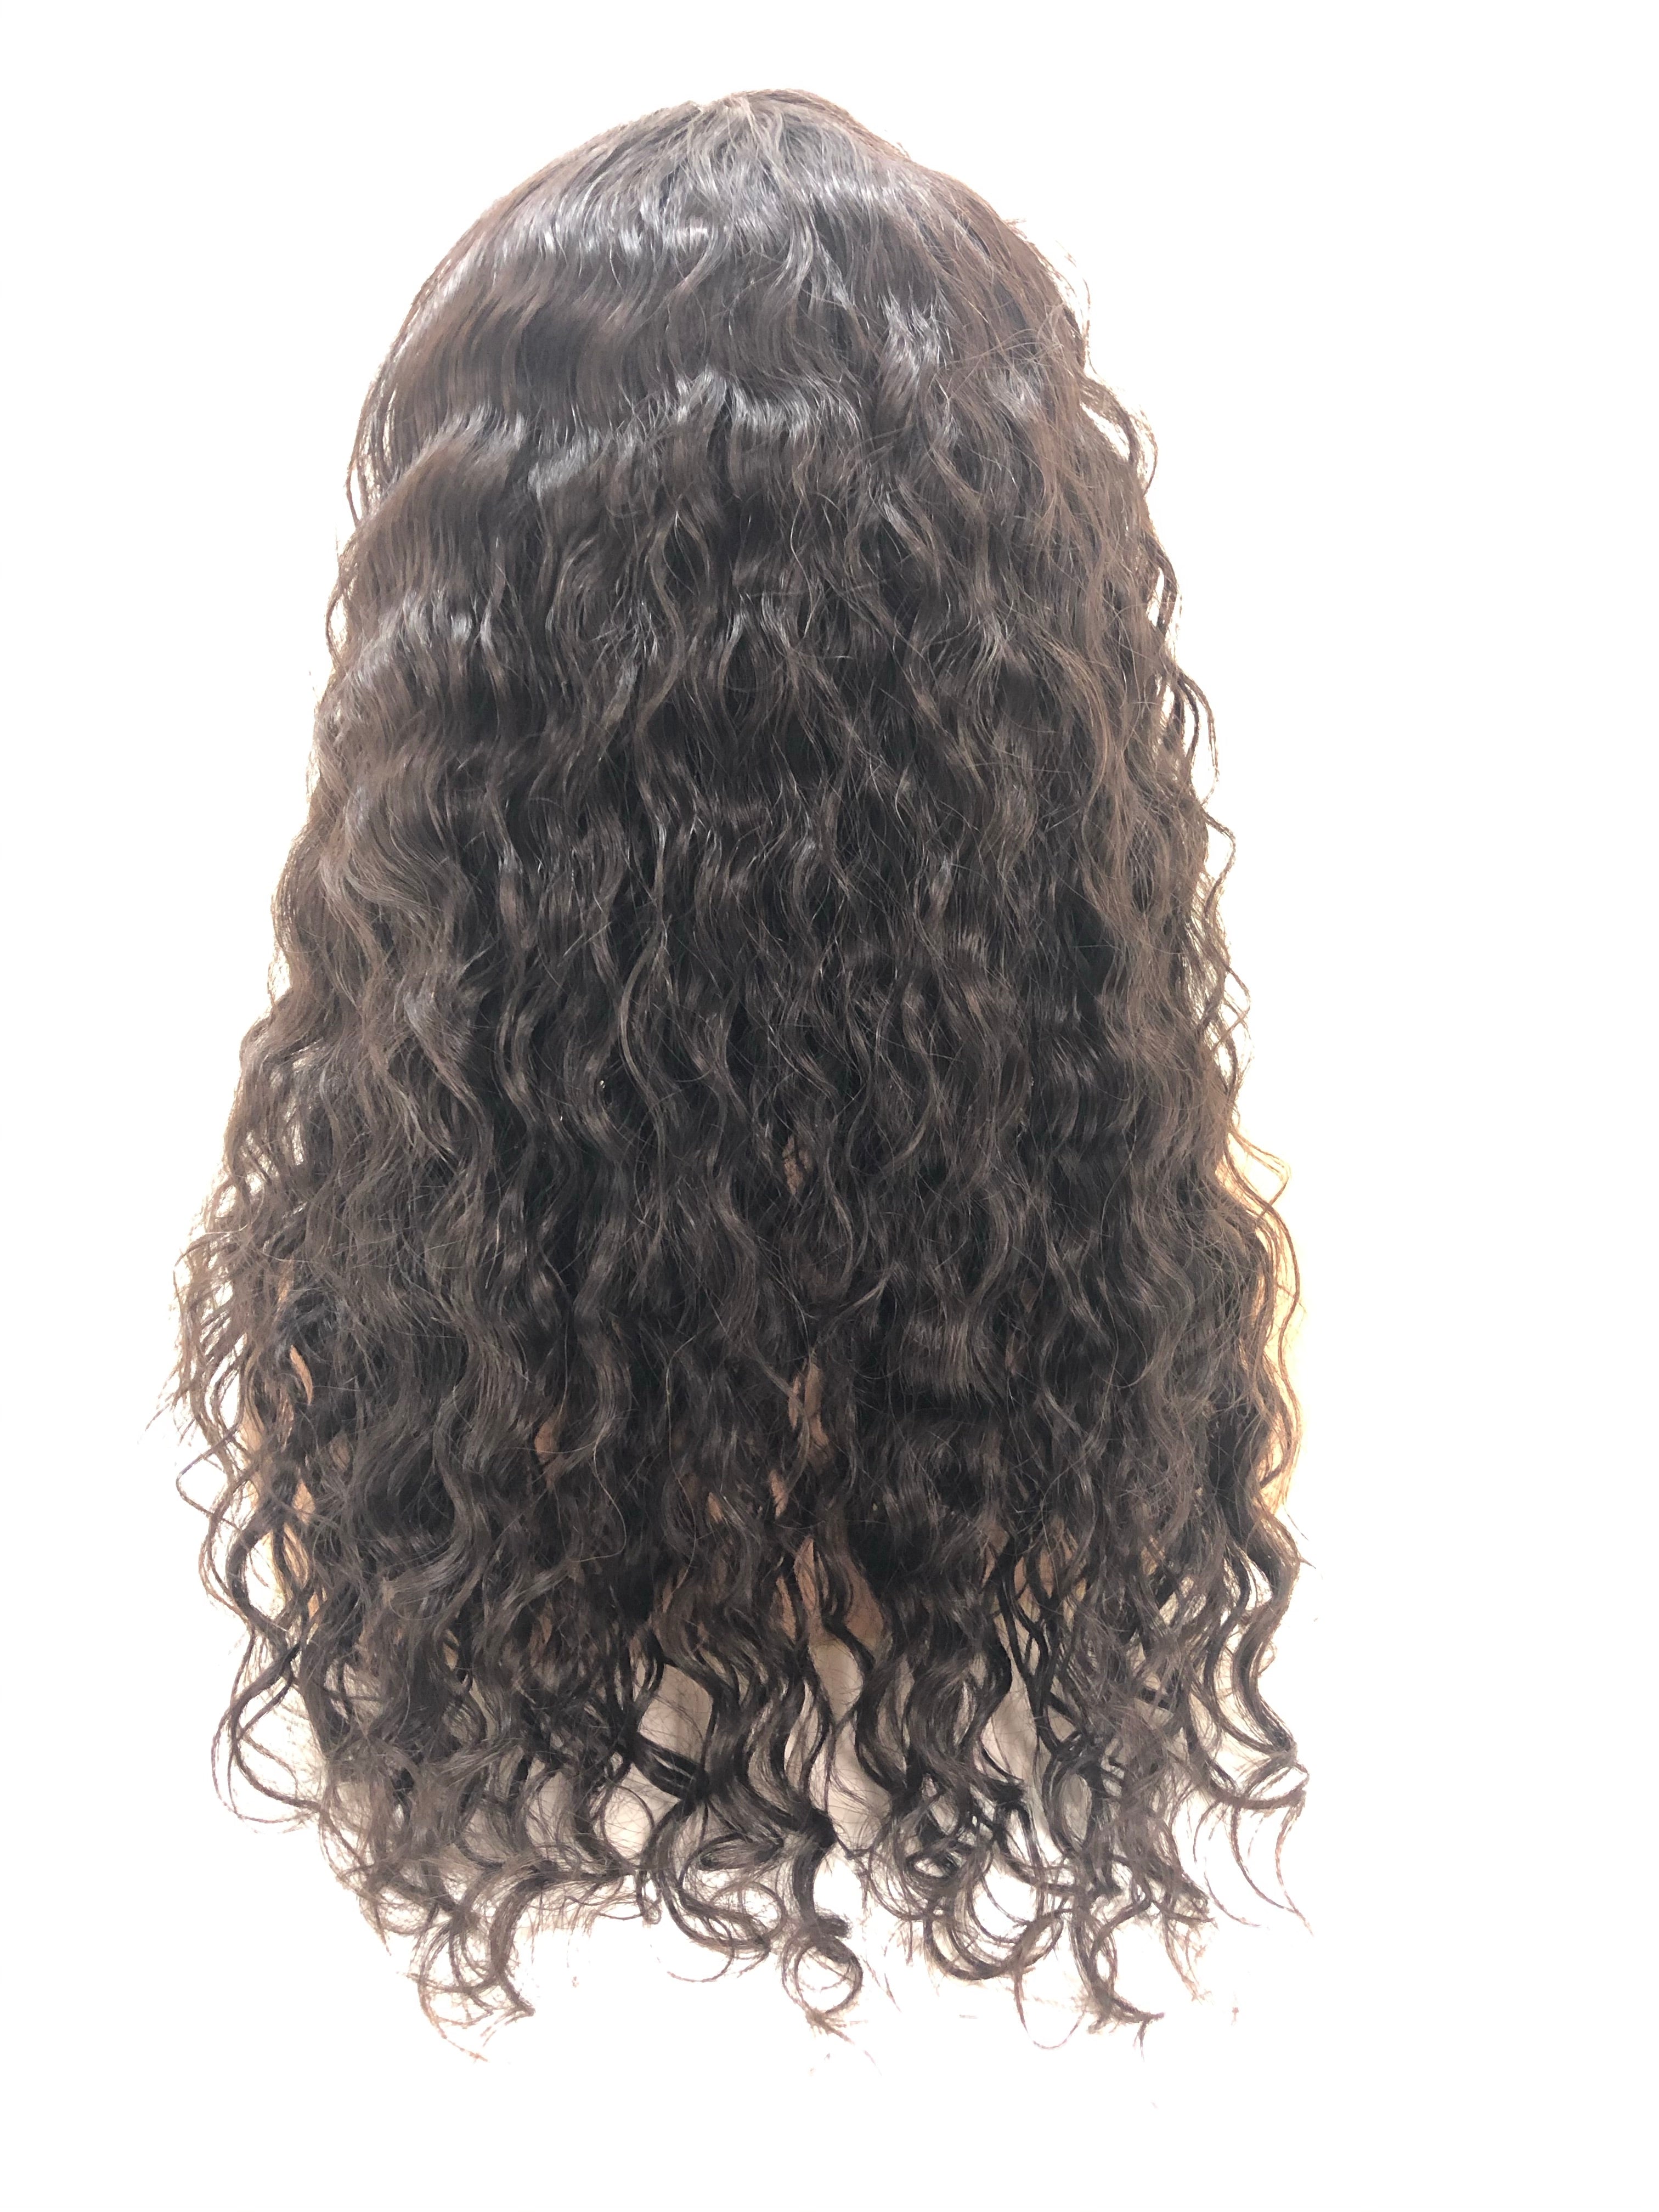 Full Lace Wig - 18" Curly